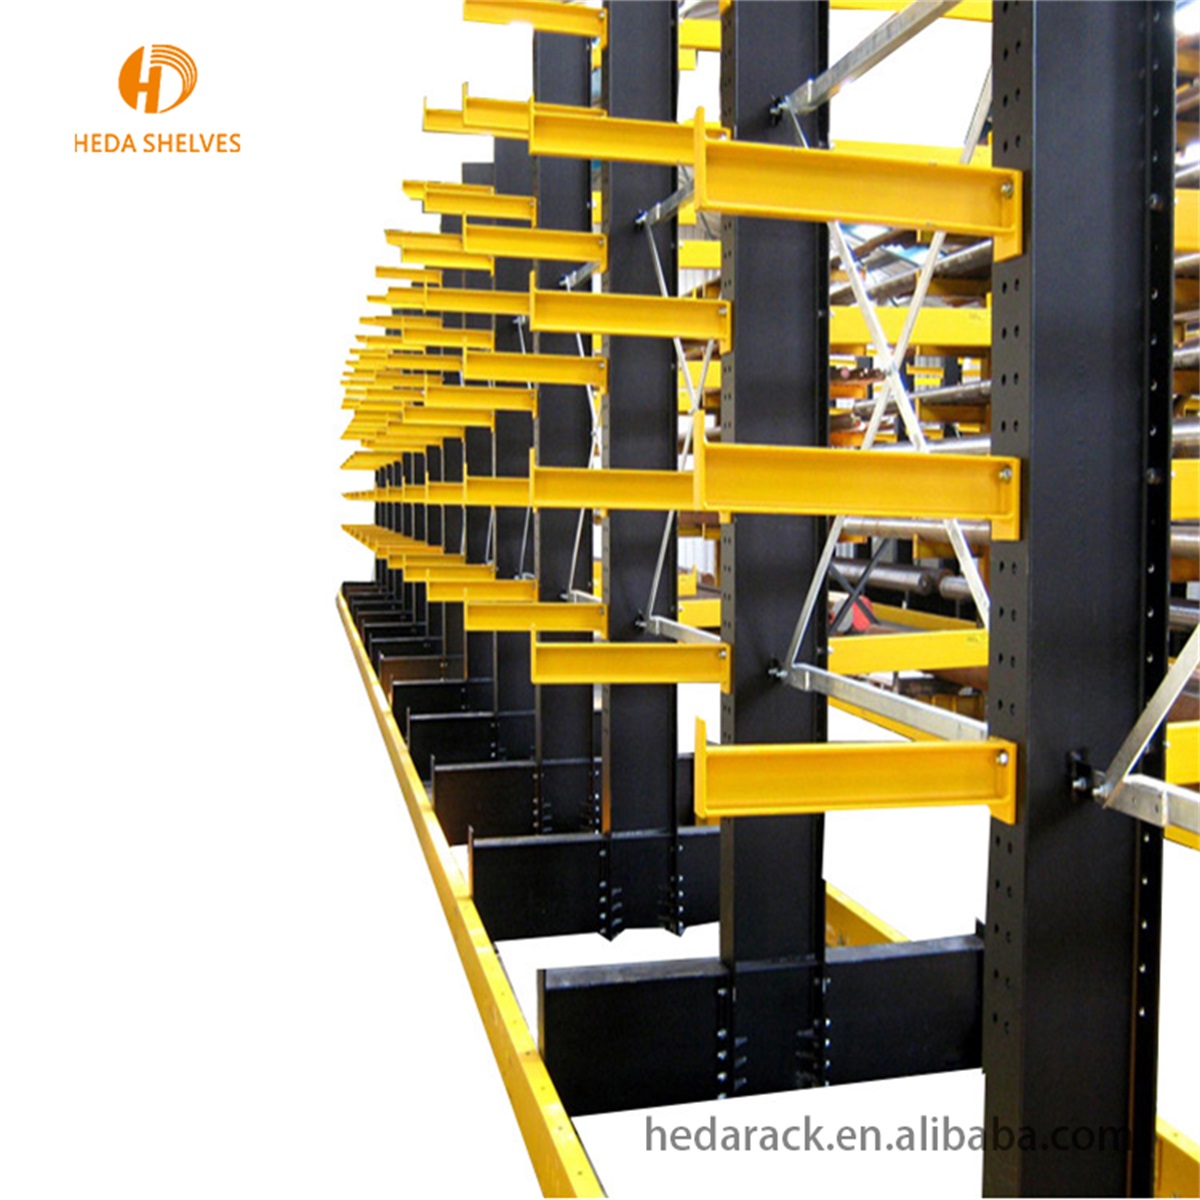 cantilever racking,heavy duty cantilever rack,tube racking,cantilever rack manufacturers,tube storage,warehouse storage,pallet rack(4